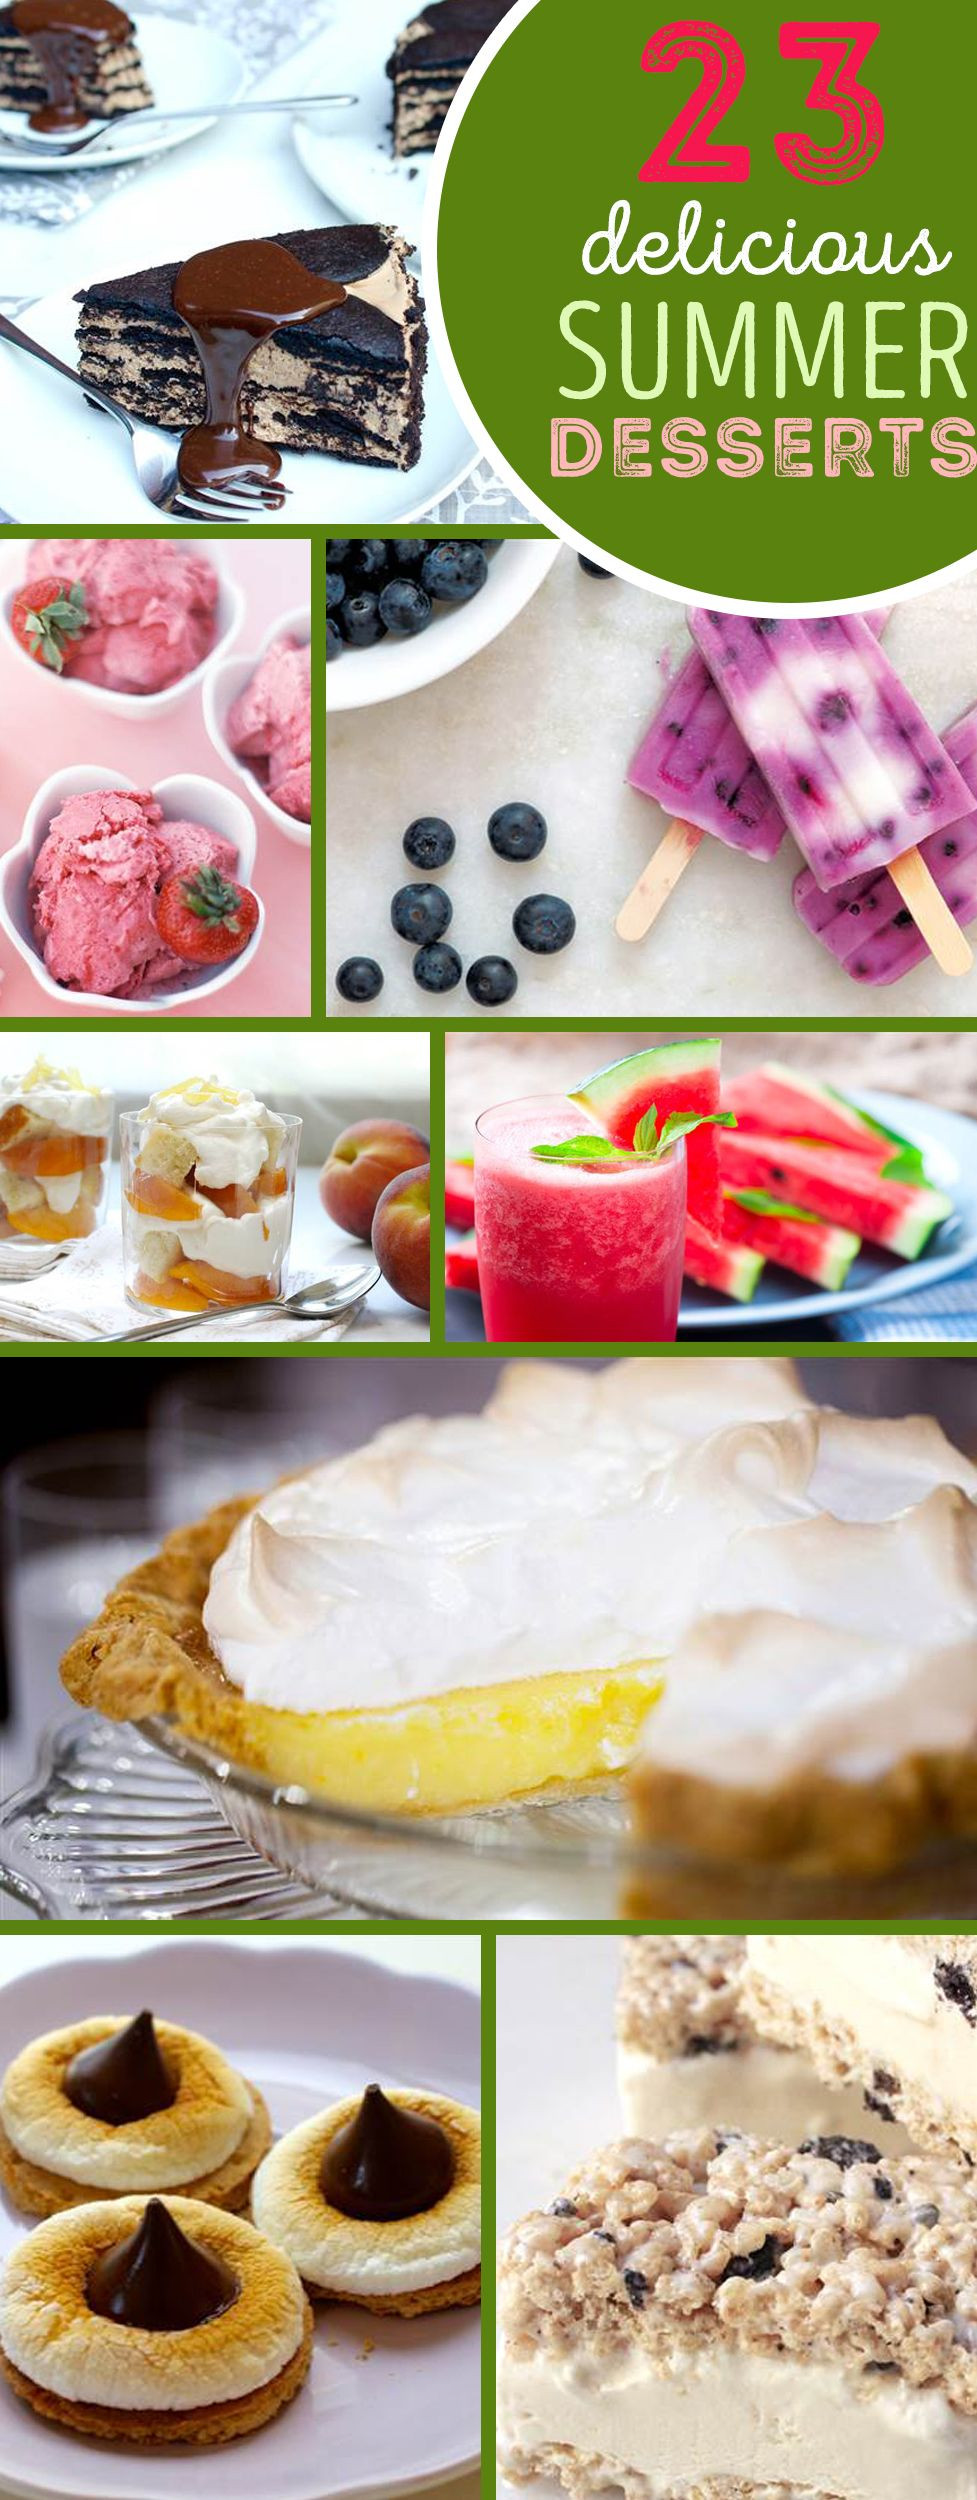 Summer Desserts For Cookouts
 23 summer desserts to bring the sweetest end to your